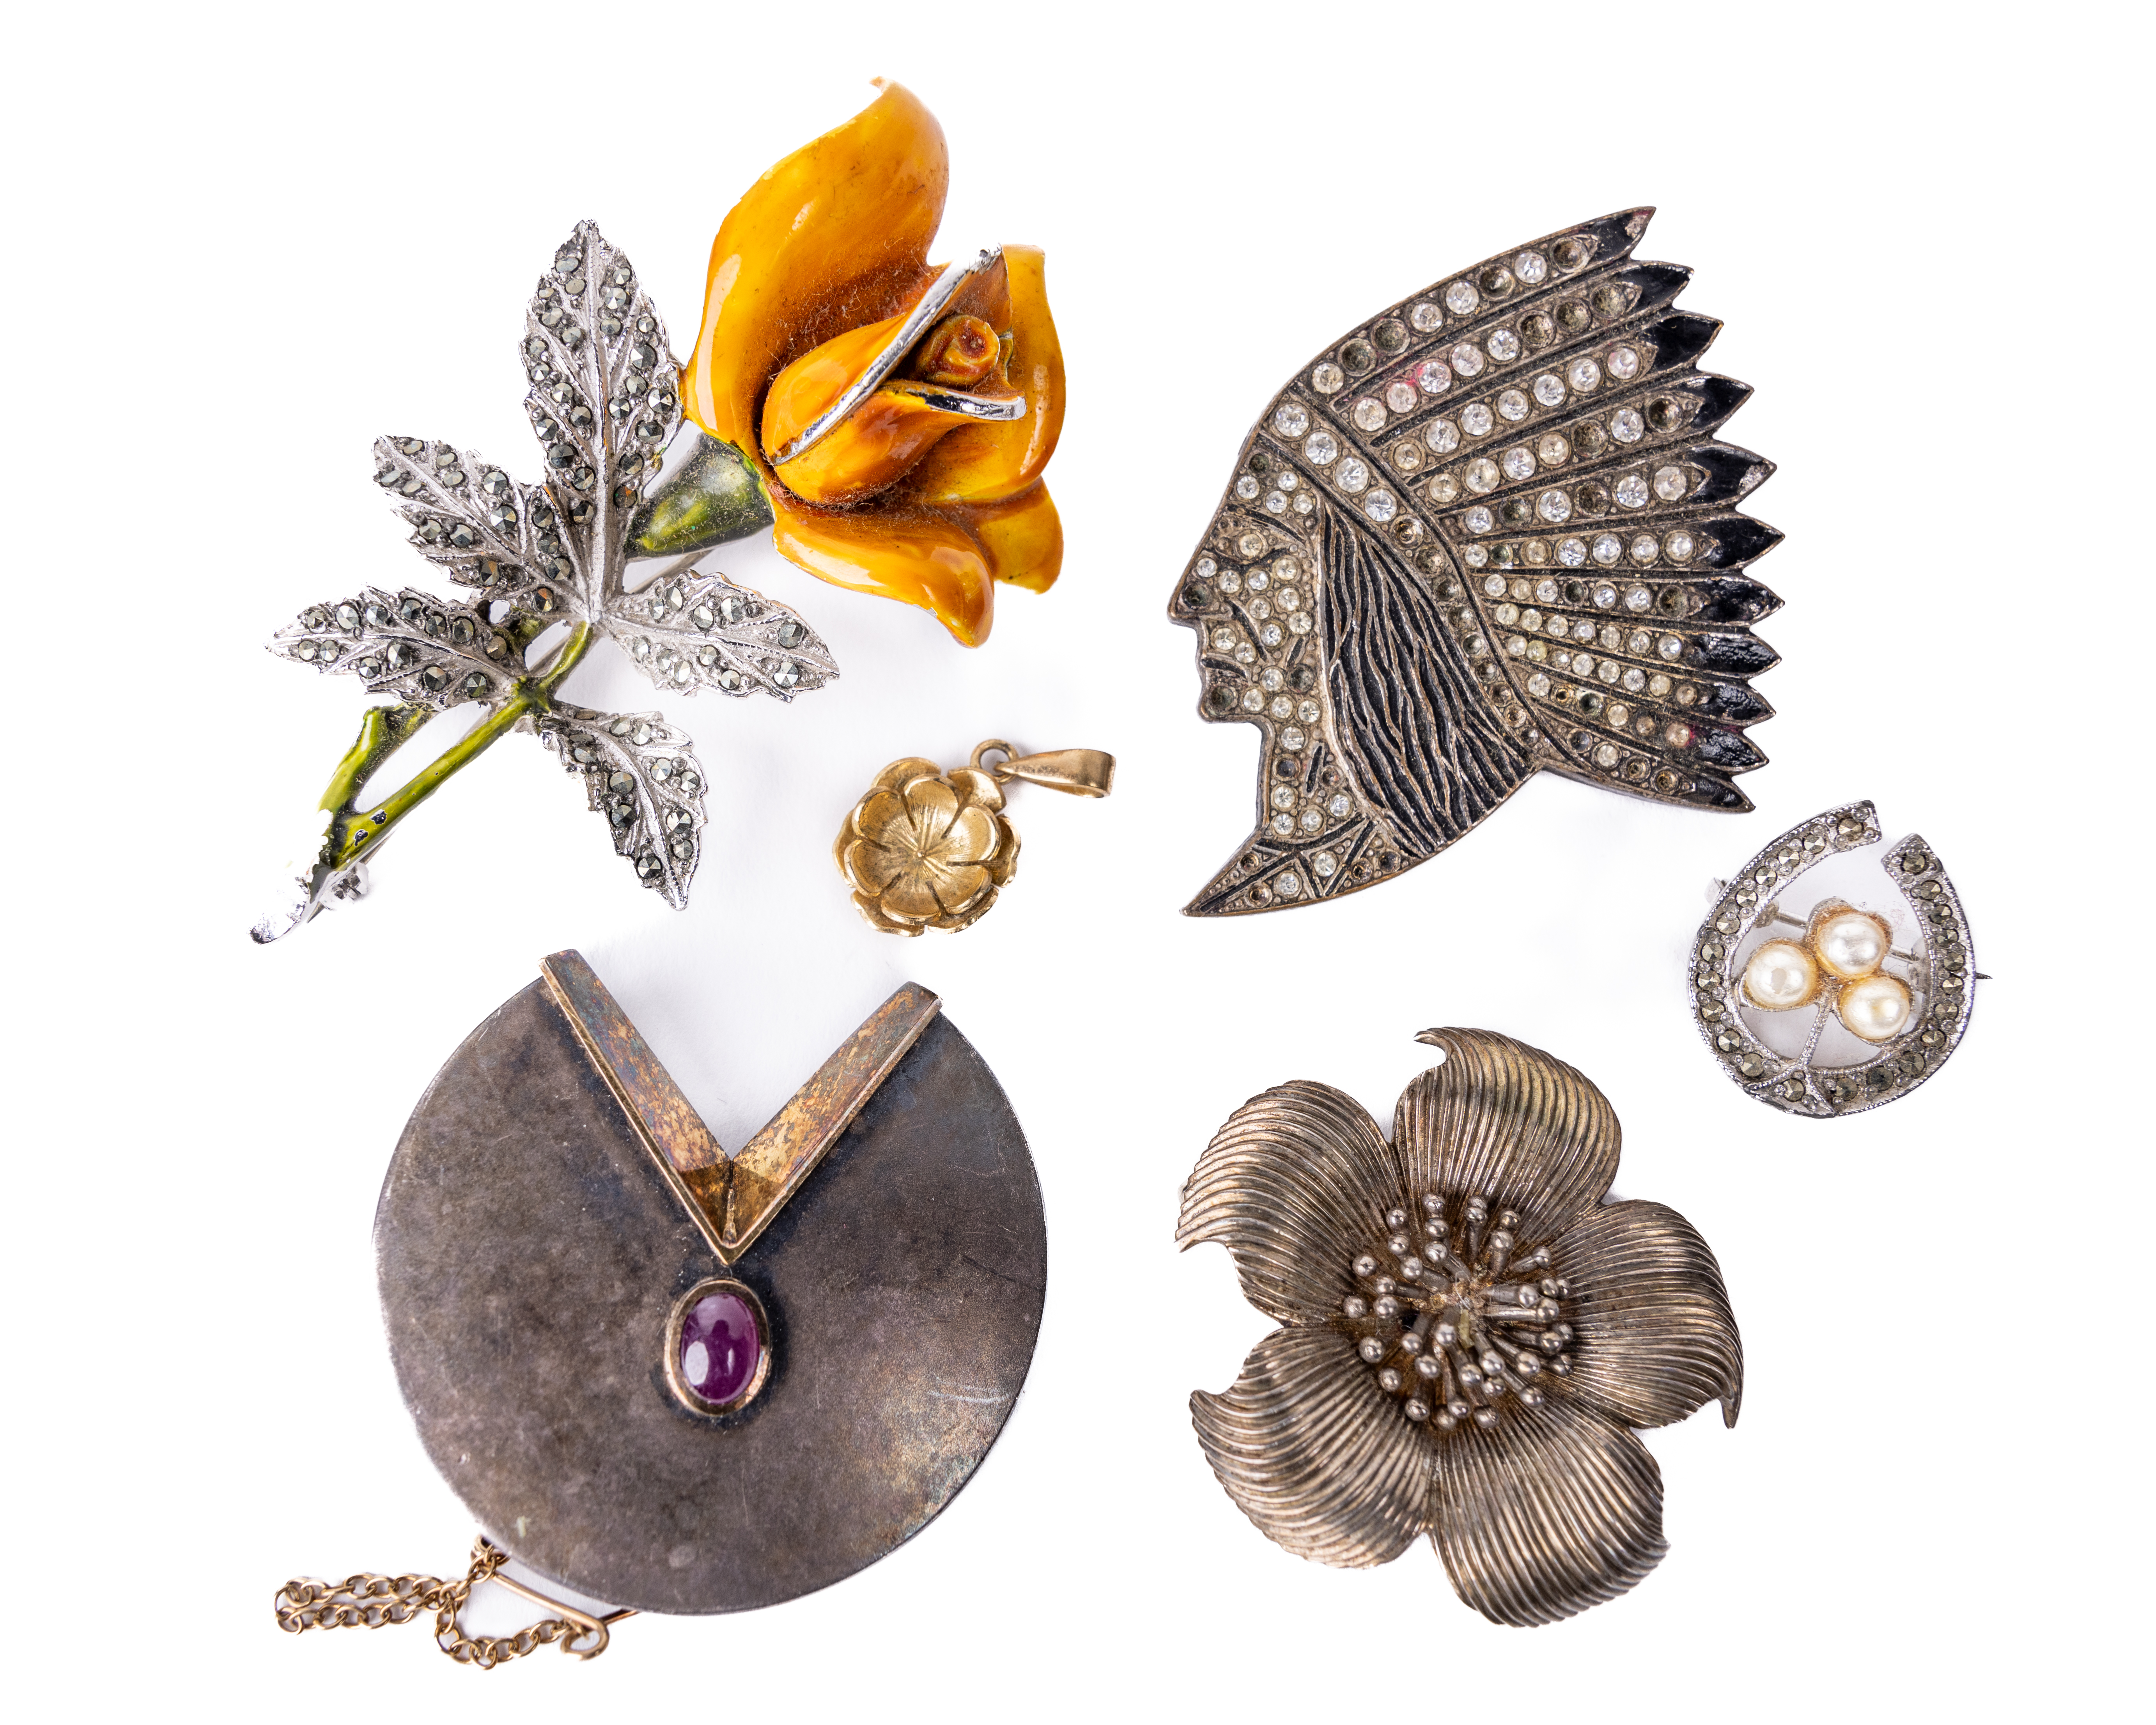 Jewellery: A silver floral design by Tiffany & Co., boxed; a French Brooch modelled as an Indian